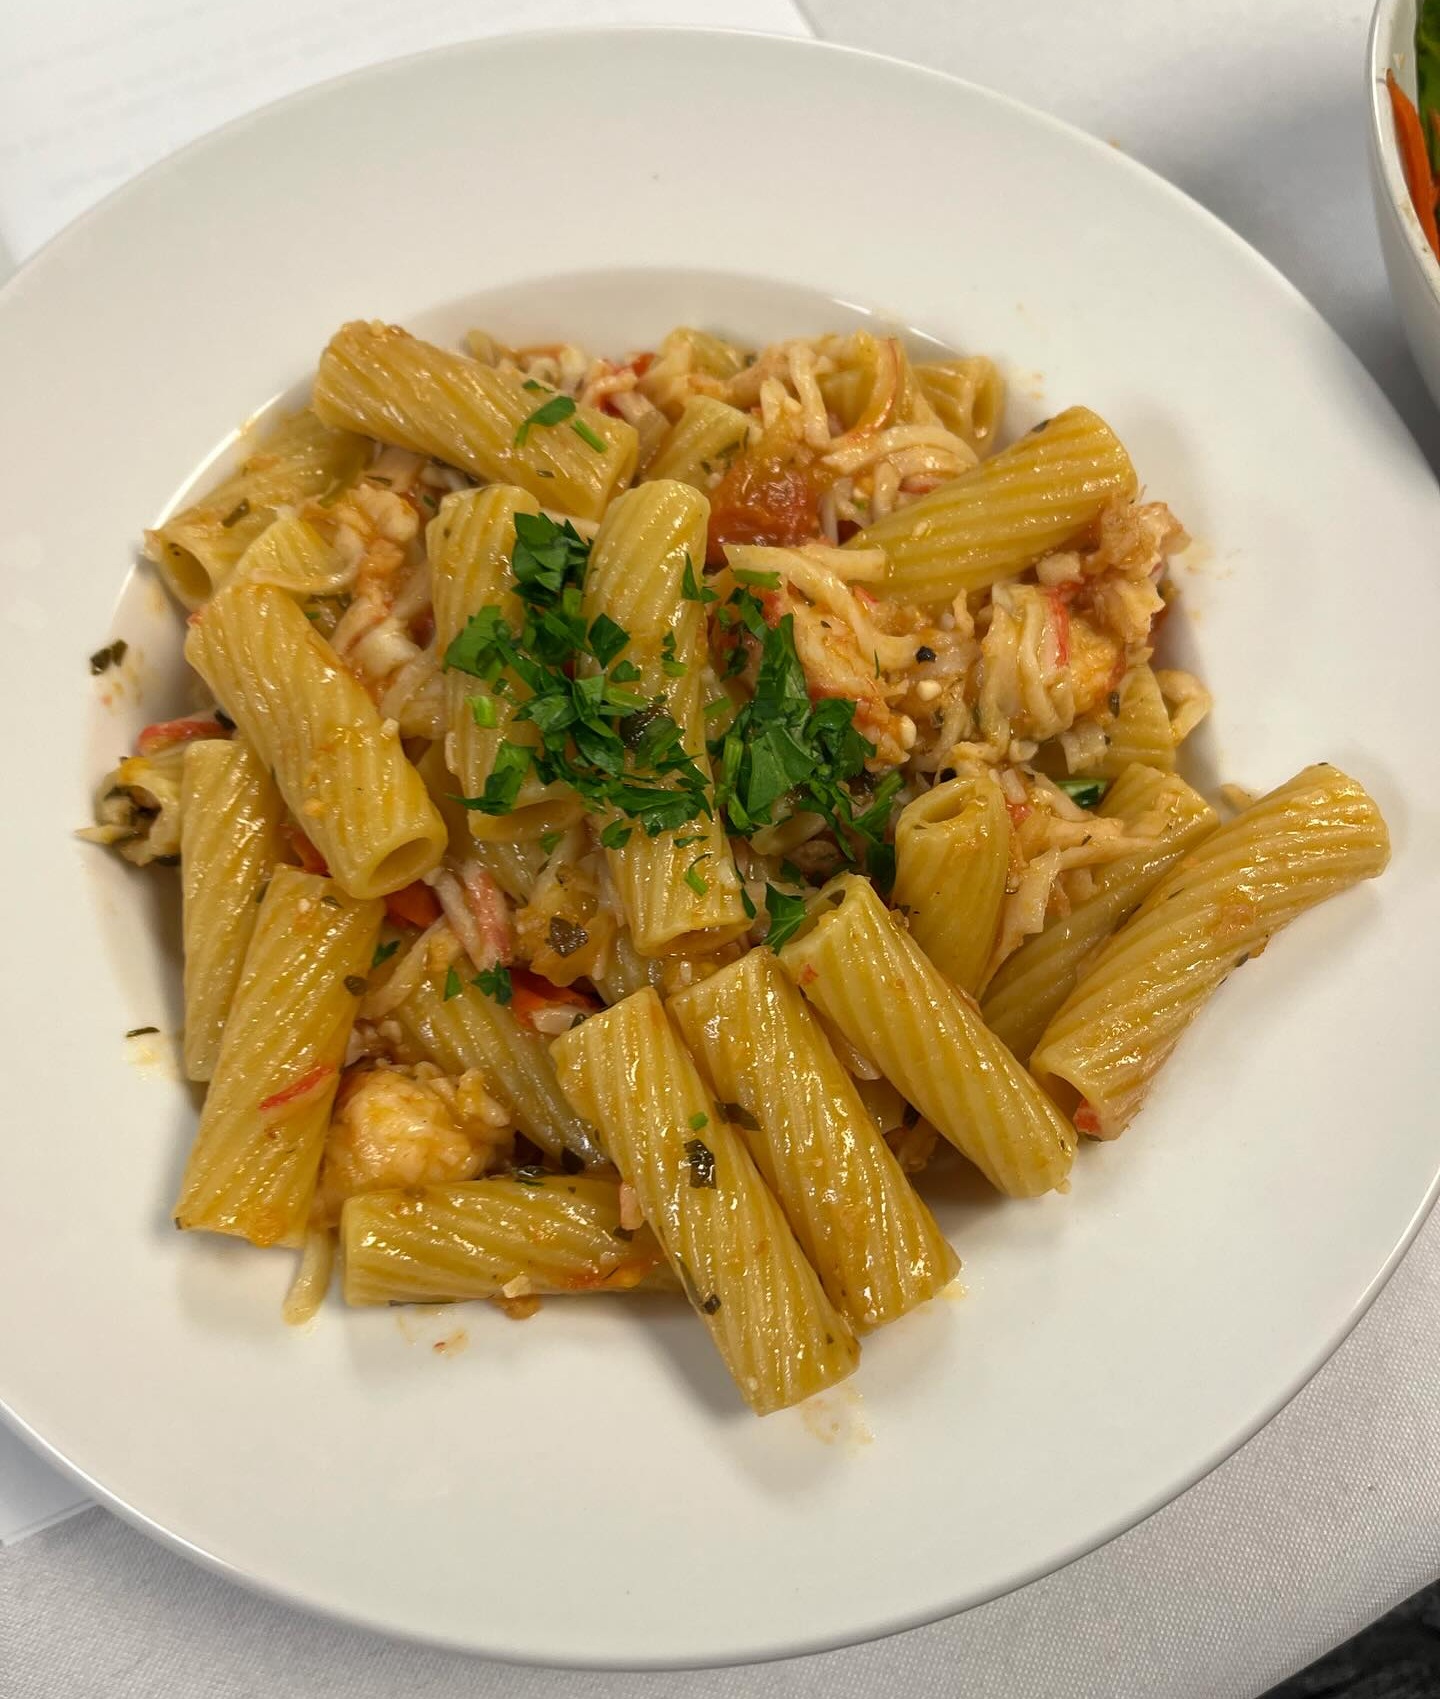 A pasta dish is served on a white plate.